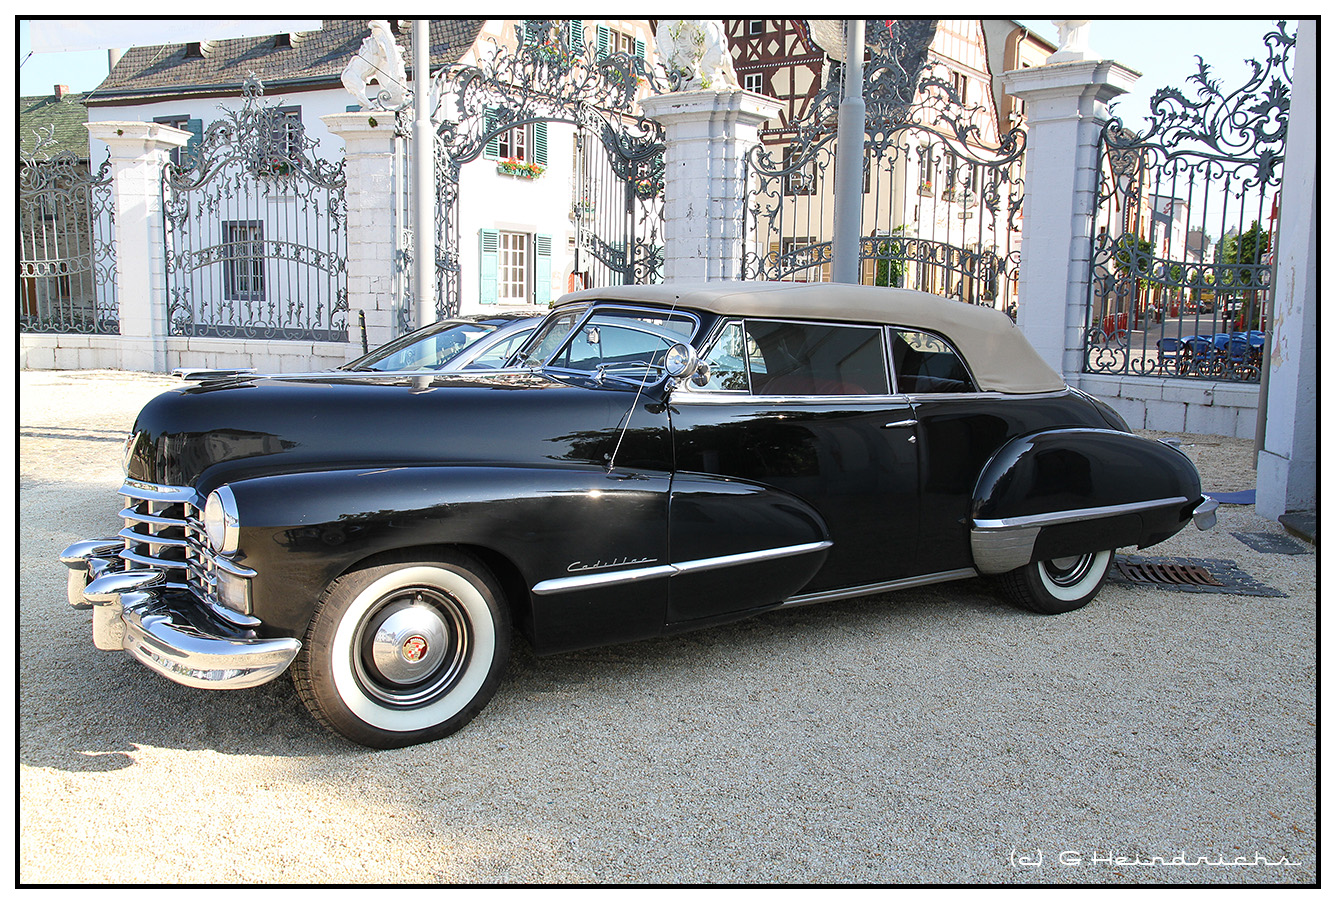 Cadillac Series 61 Sedanette Coupe - 1949